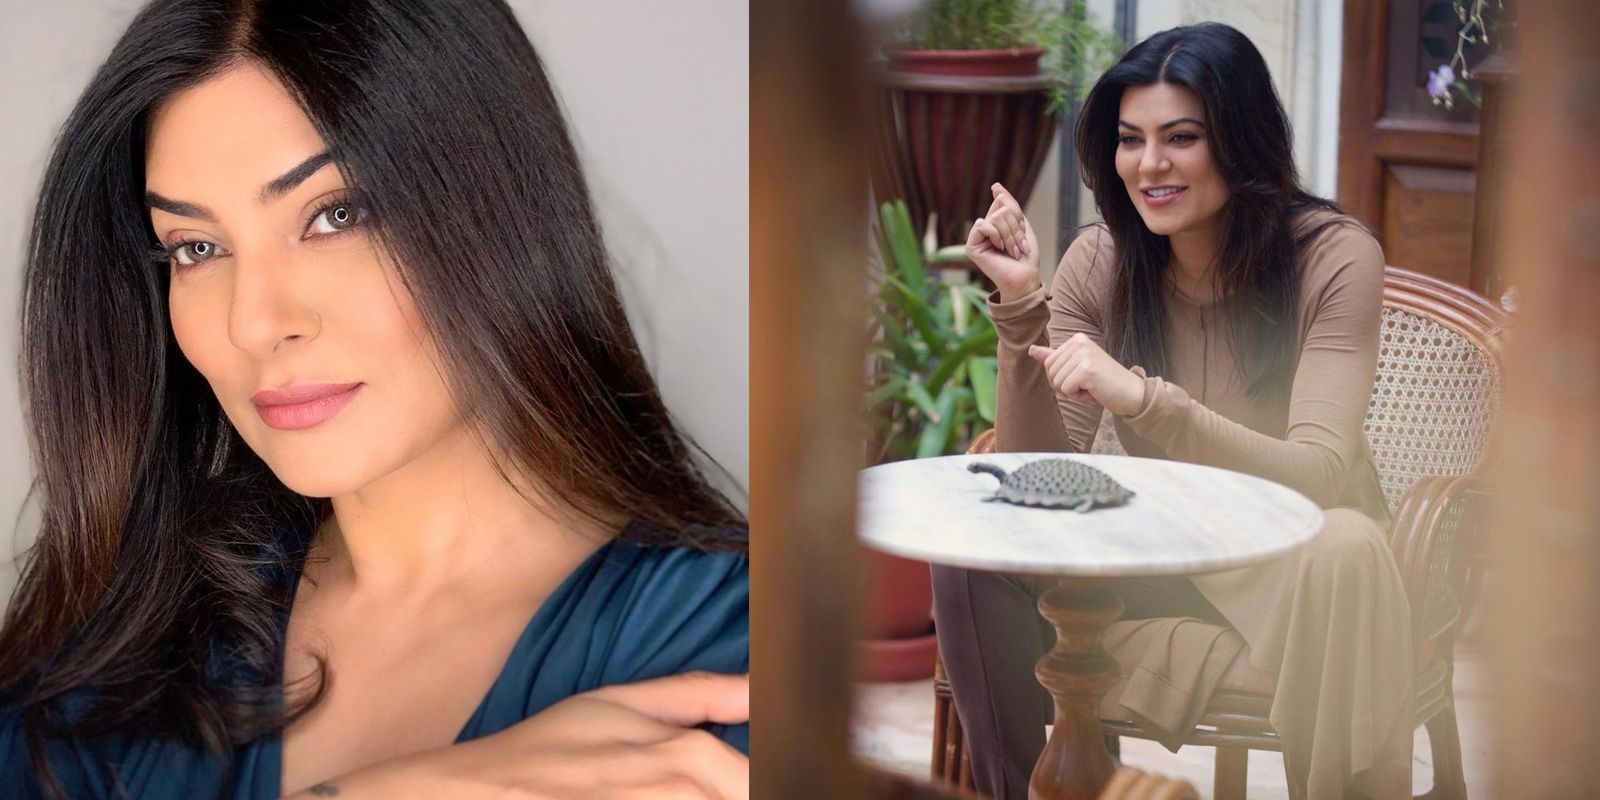 Sushmita Sen Shares A Flawless Selfie Along With A Life Lesson; Says ‘Even At 45, I Still Make Big Blunders’